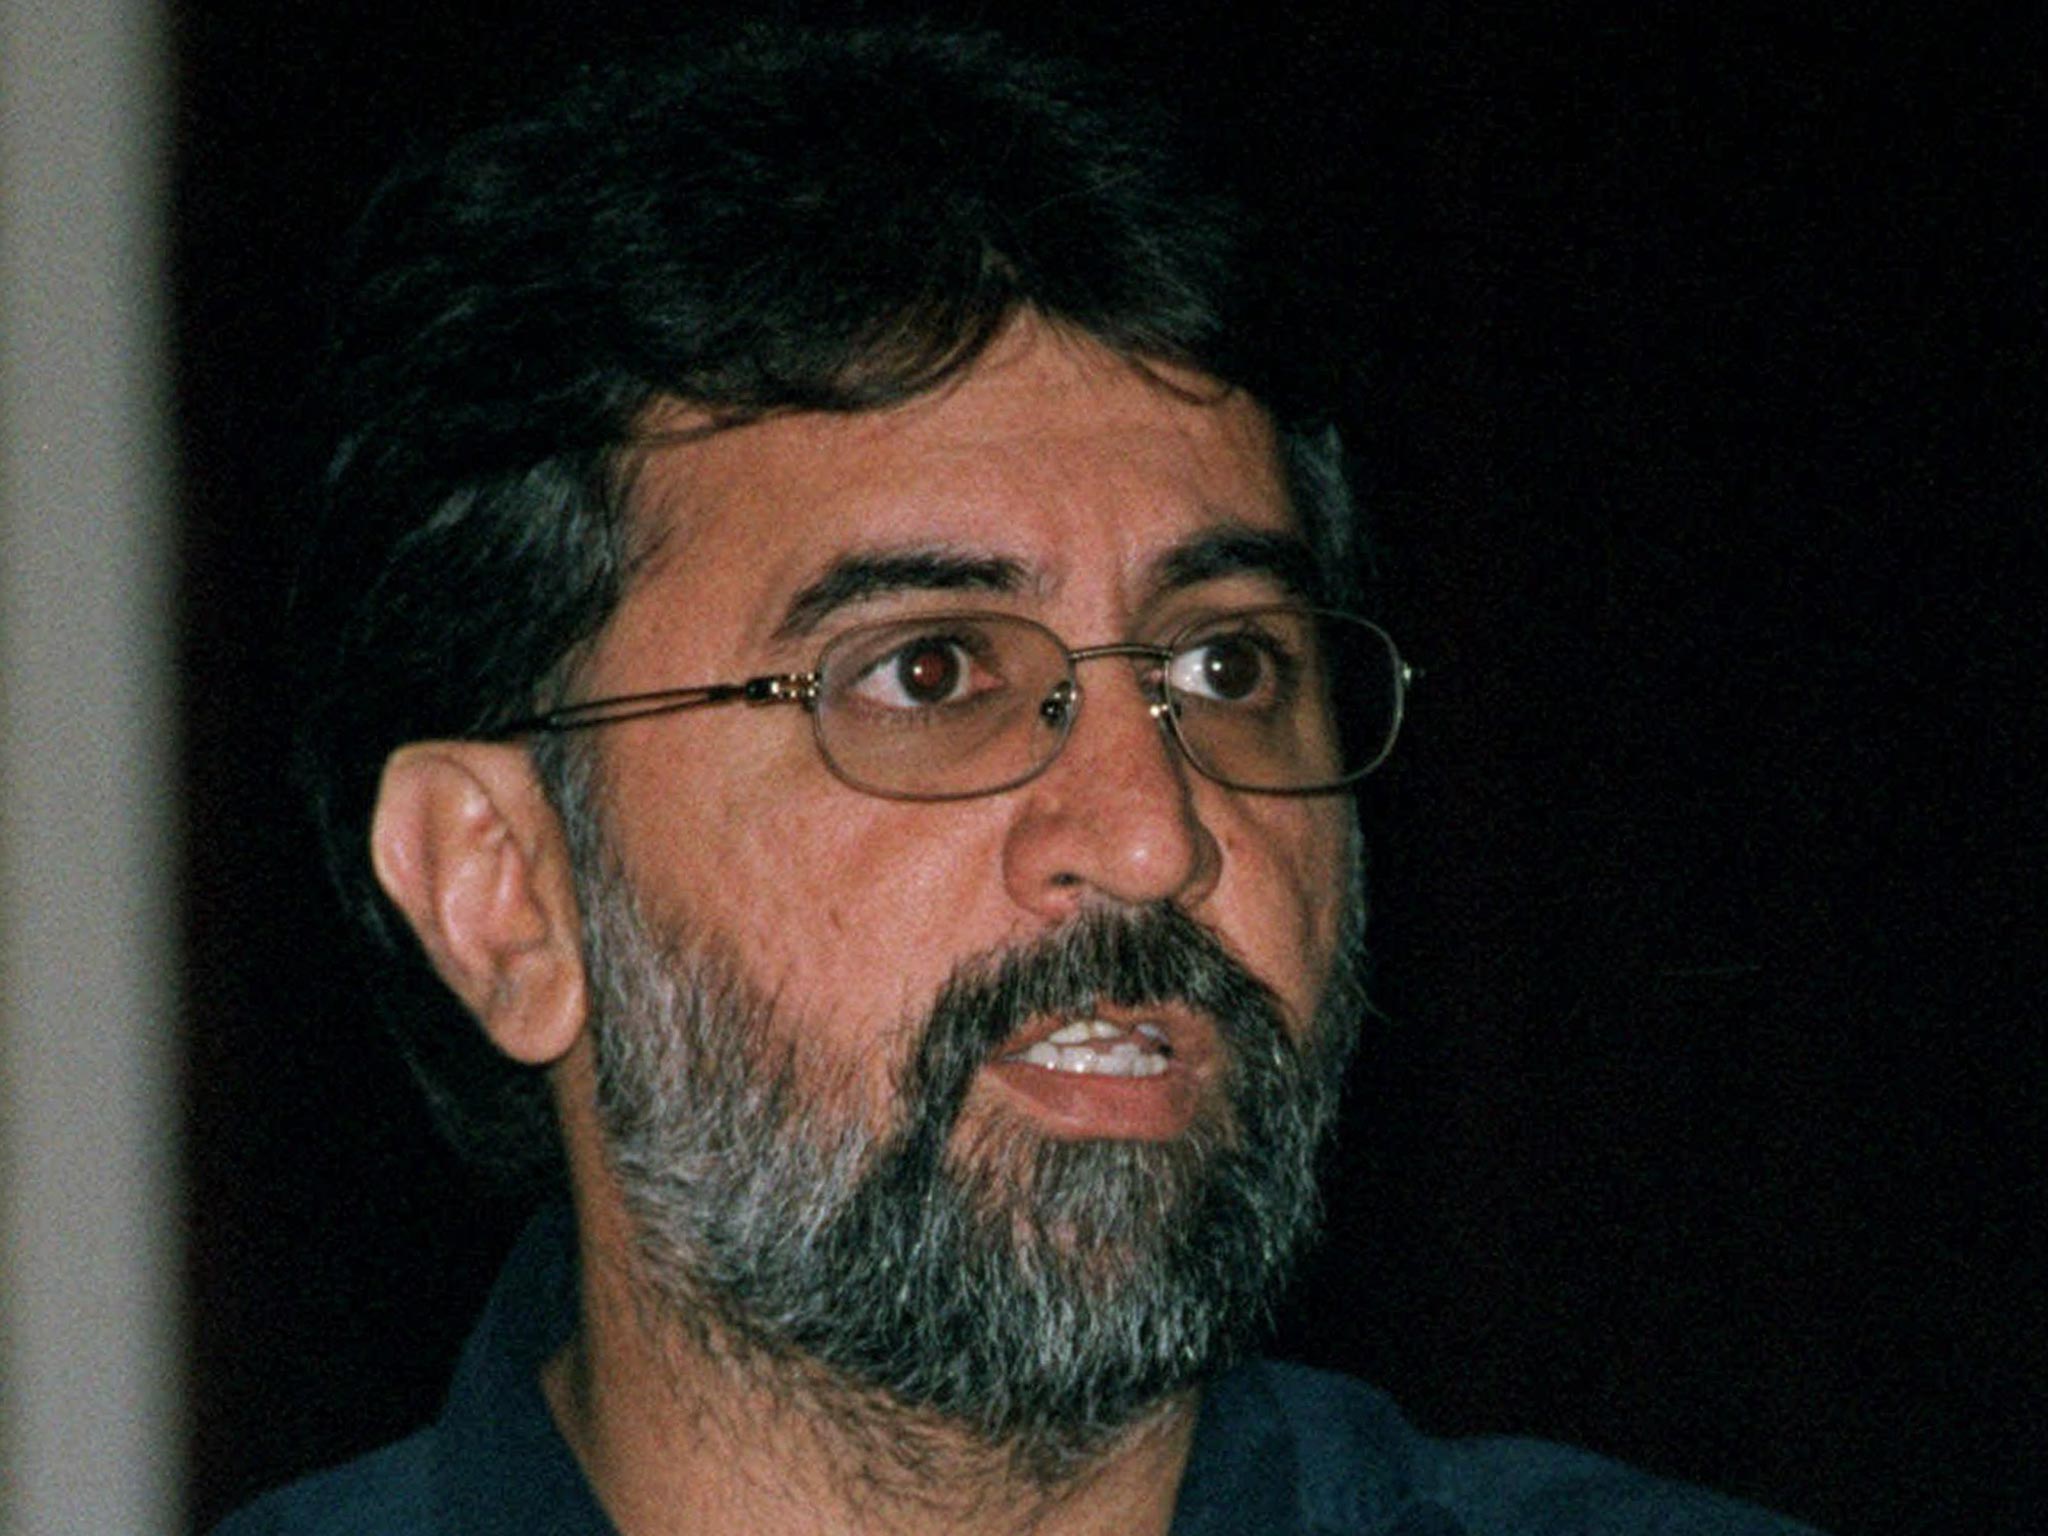 Tehelka editor Tarun Tejpal has been charged with the assault and rape of a woman reporter